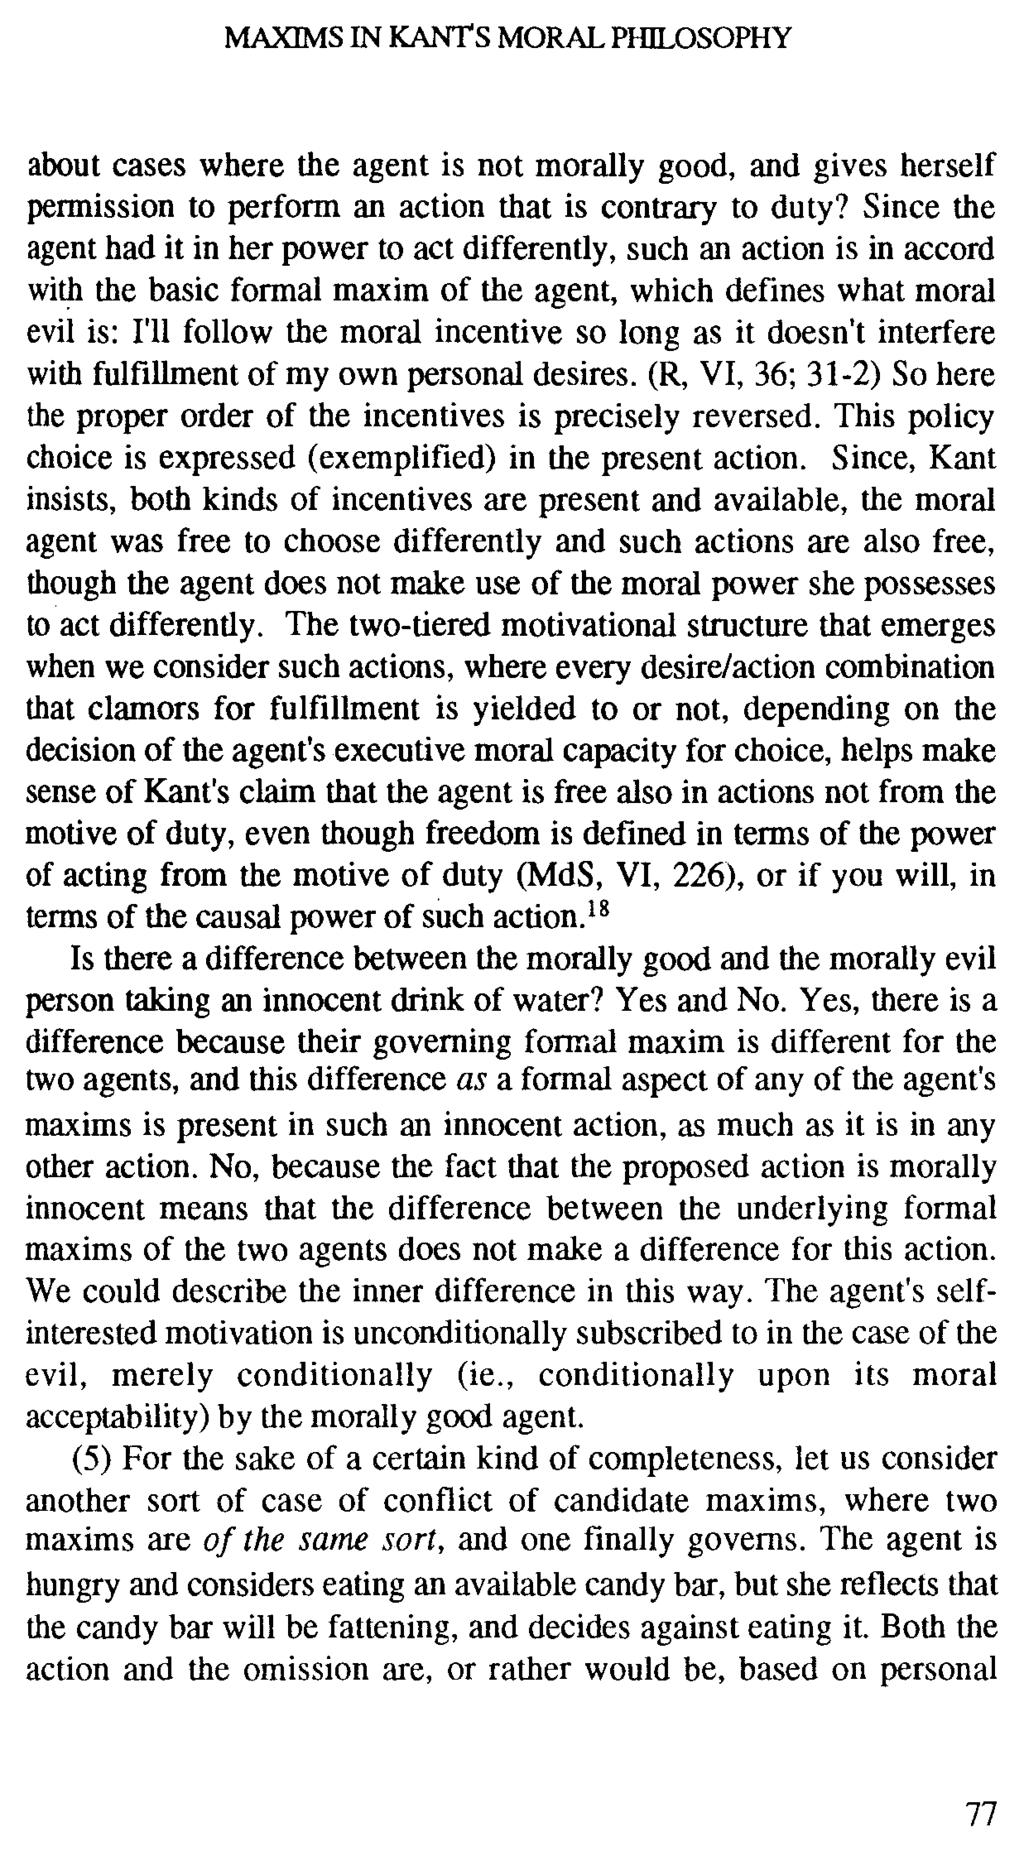 MAXIMS IN KANTs MORAL PHILOSOPHY about cases where the agent is not morally good, and gives herself permission to perform an action that is contrary to duty?